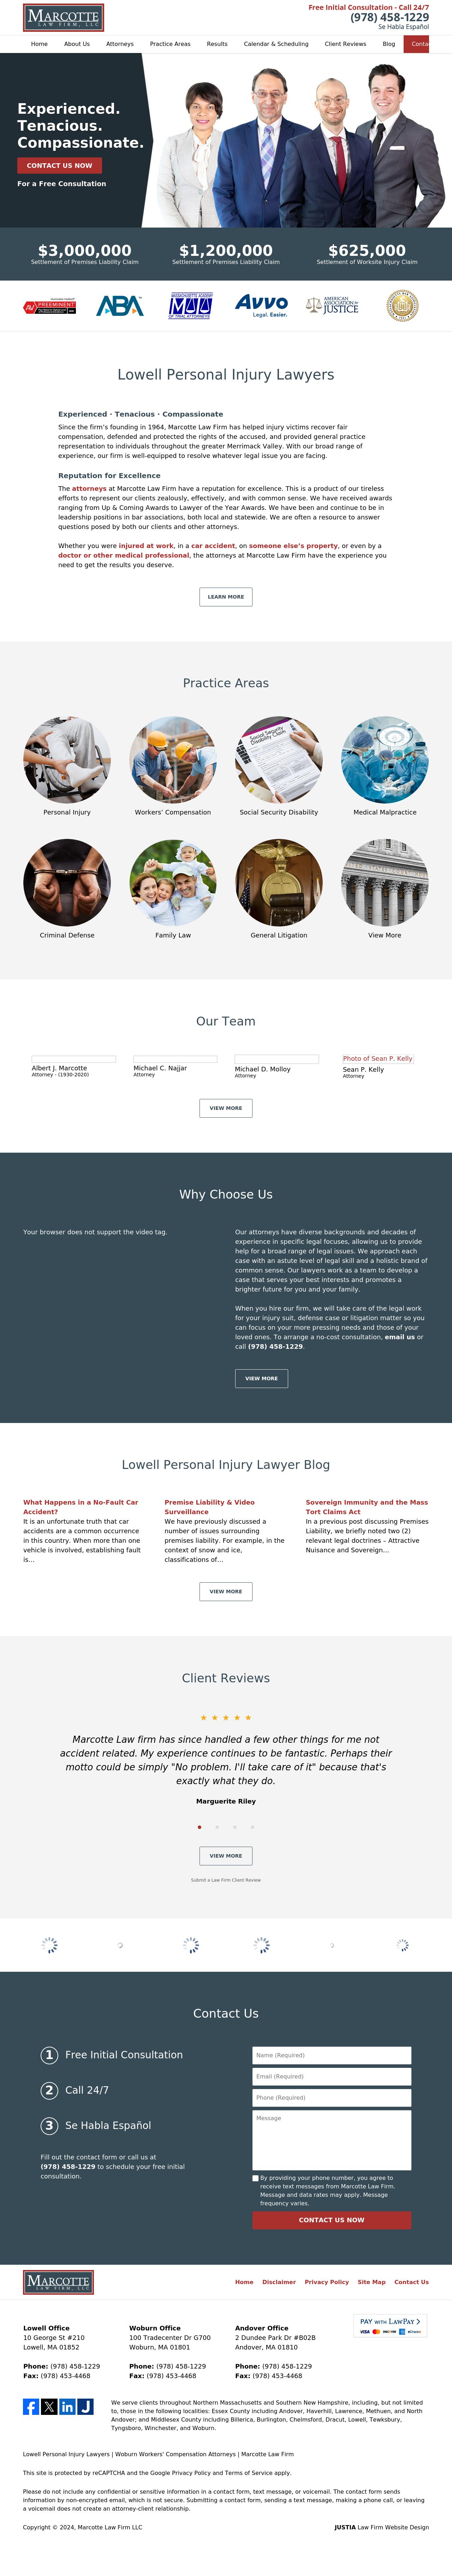 Marcotte Law Firm - Lowell MA Lawyers